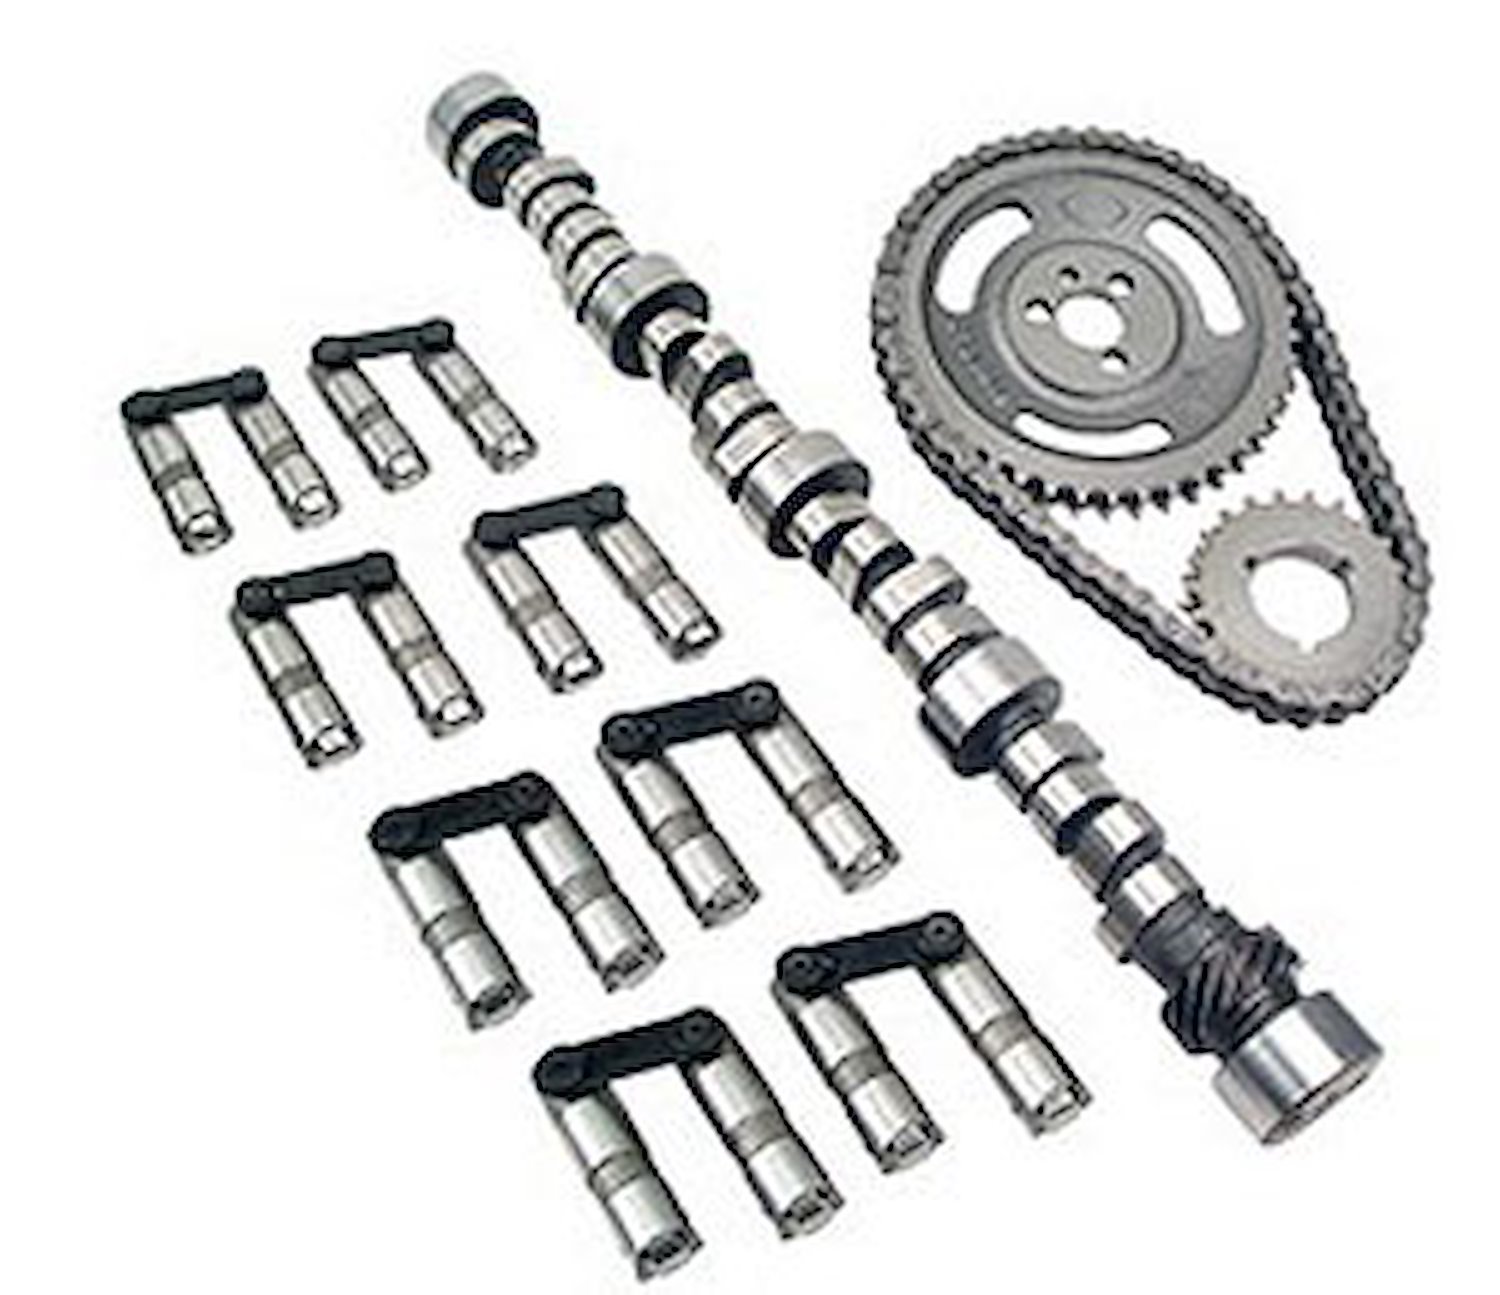 XFI Hydraulic Roller Camshaft Small Kit Small Block Chevy 305/350 1987-95 Lift: .576"/.570" With 1.6 Rockers